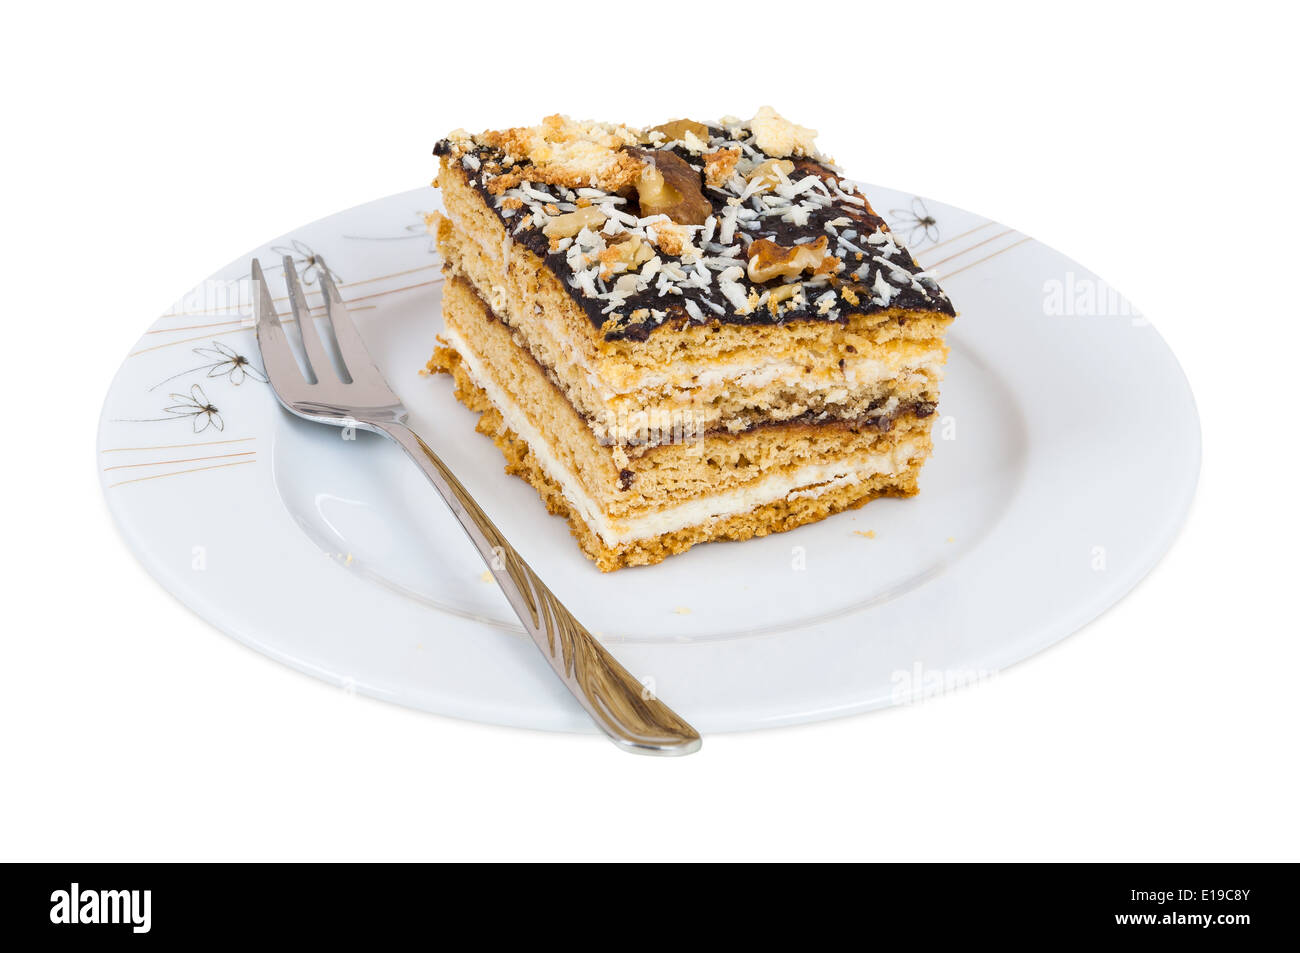 Honey cake with chocolate on a plate isolated on white background with clipping path Stock Photo